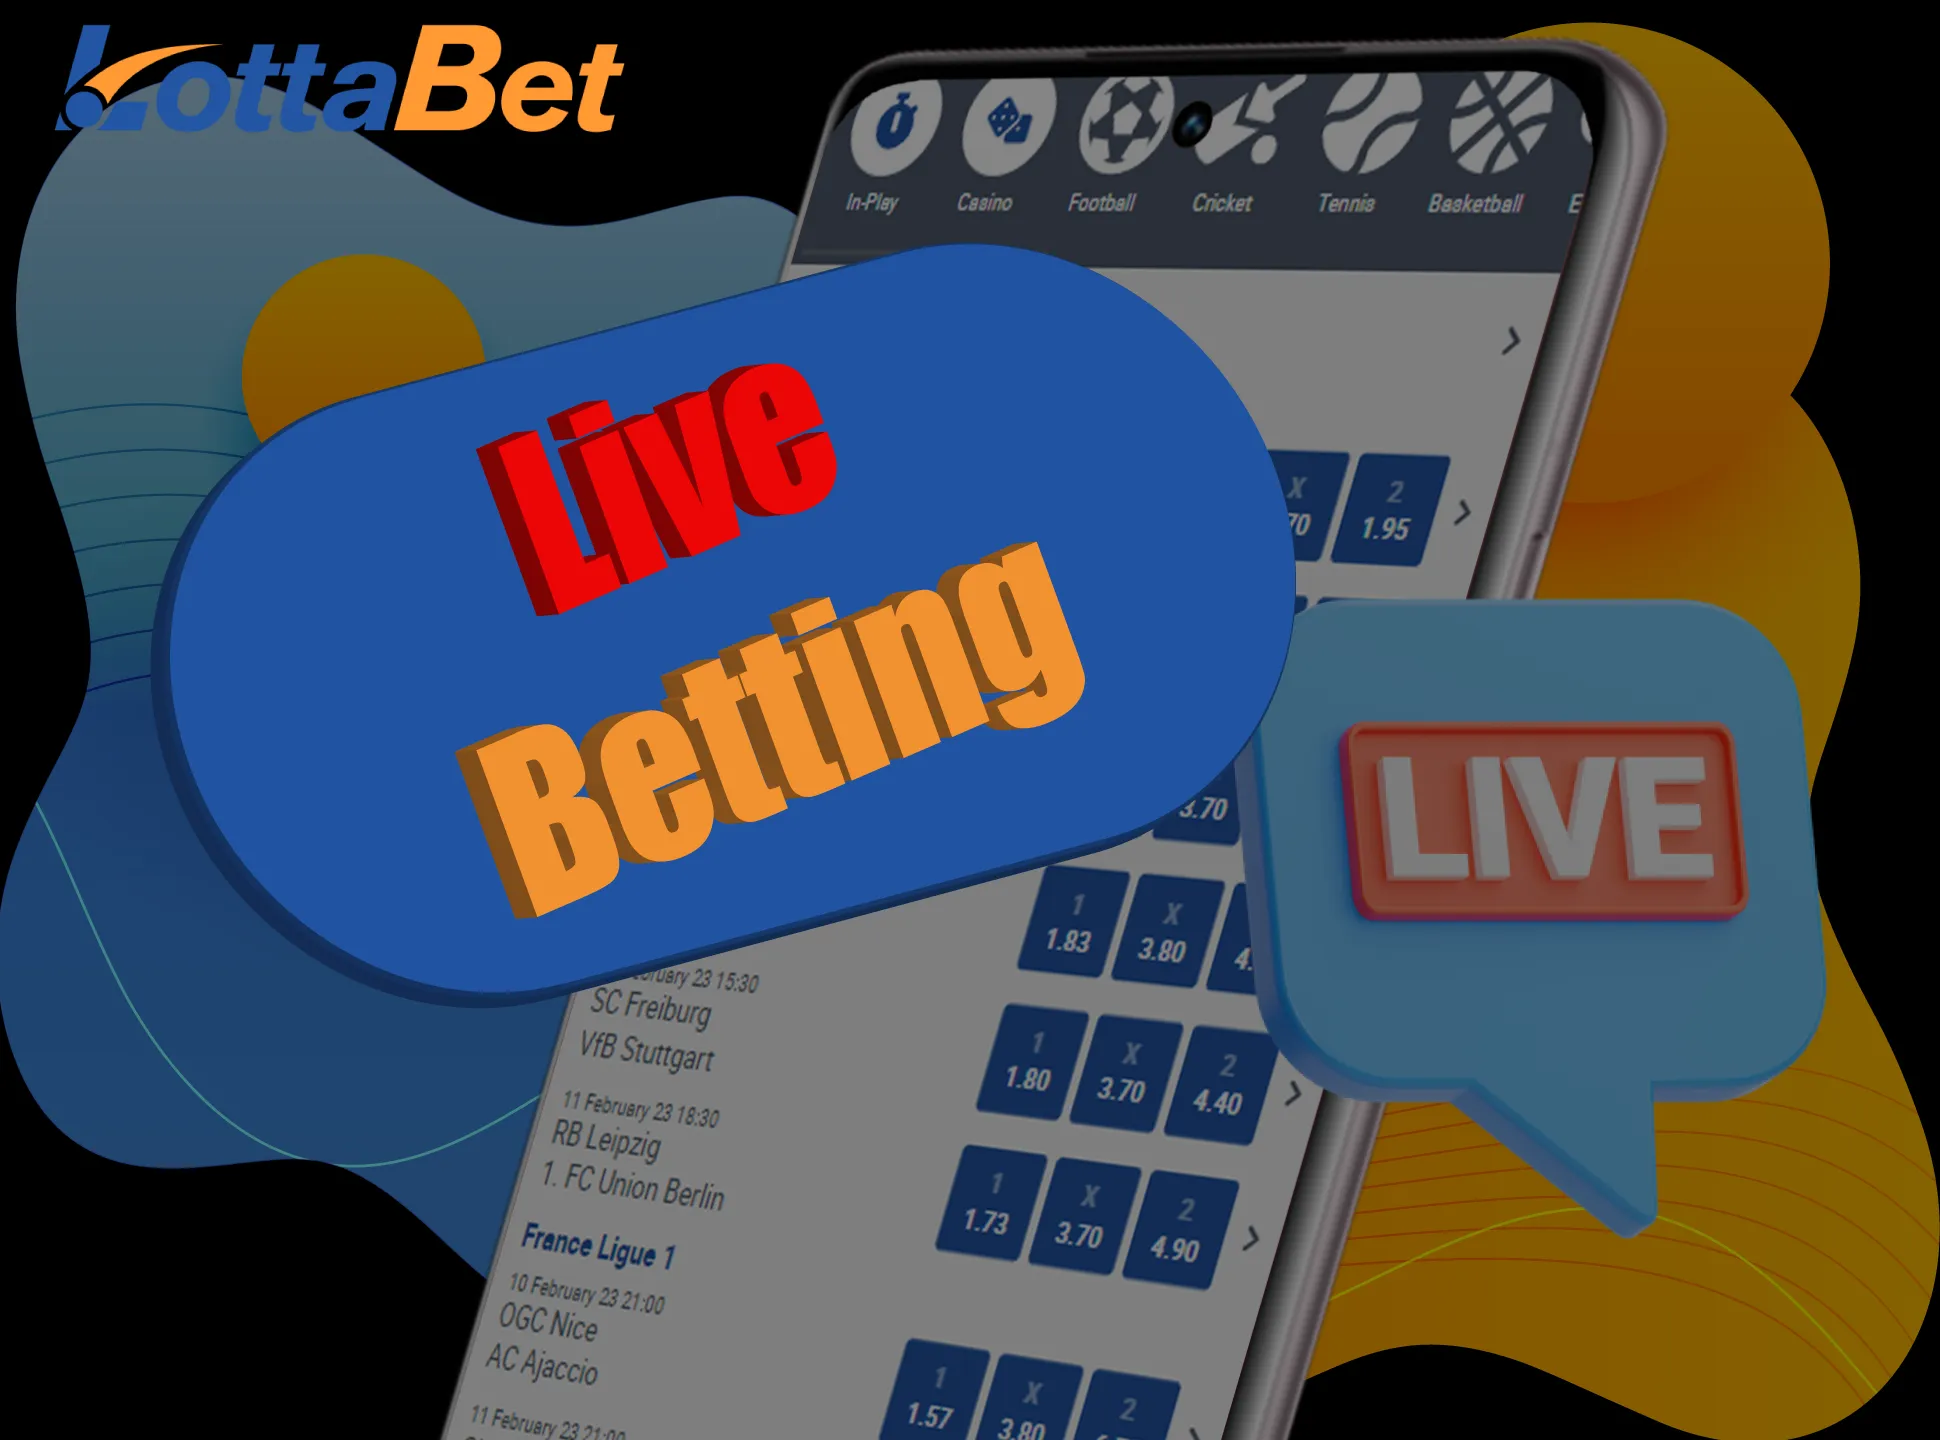 Bet on favorite sport team during the match on the Lottabet website.